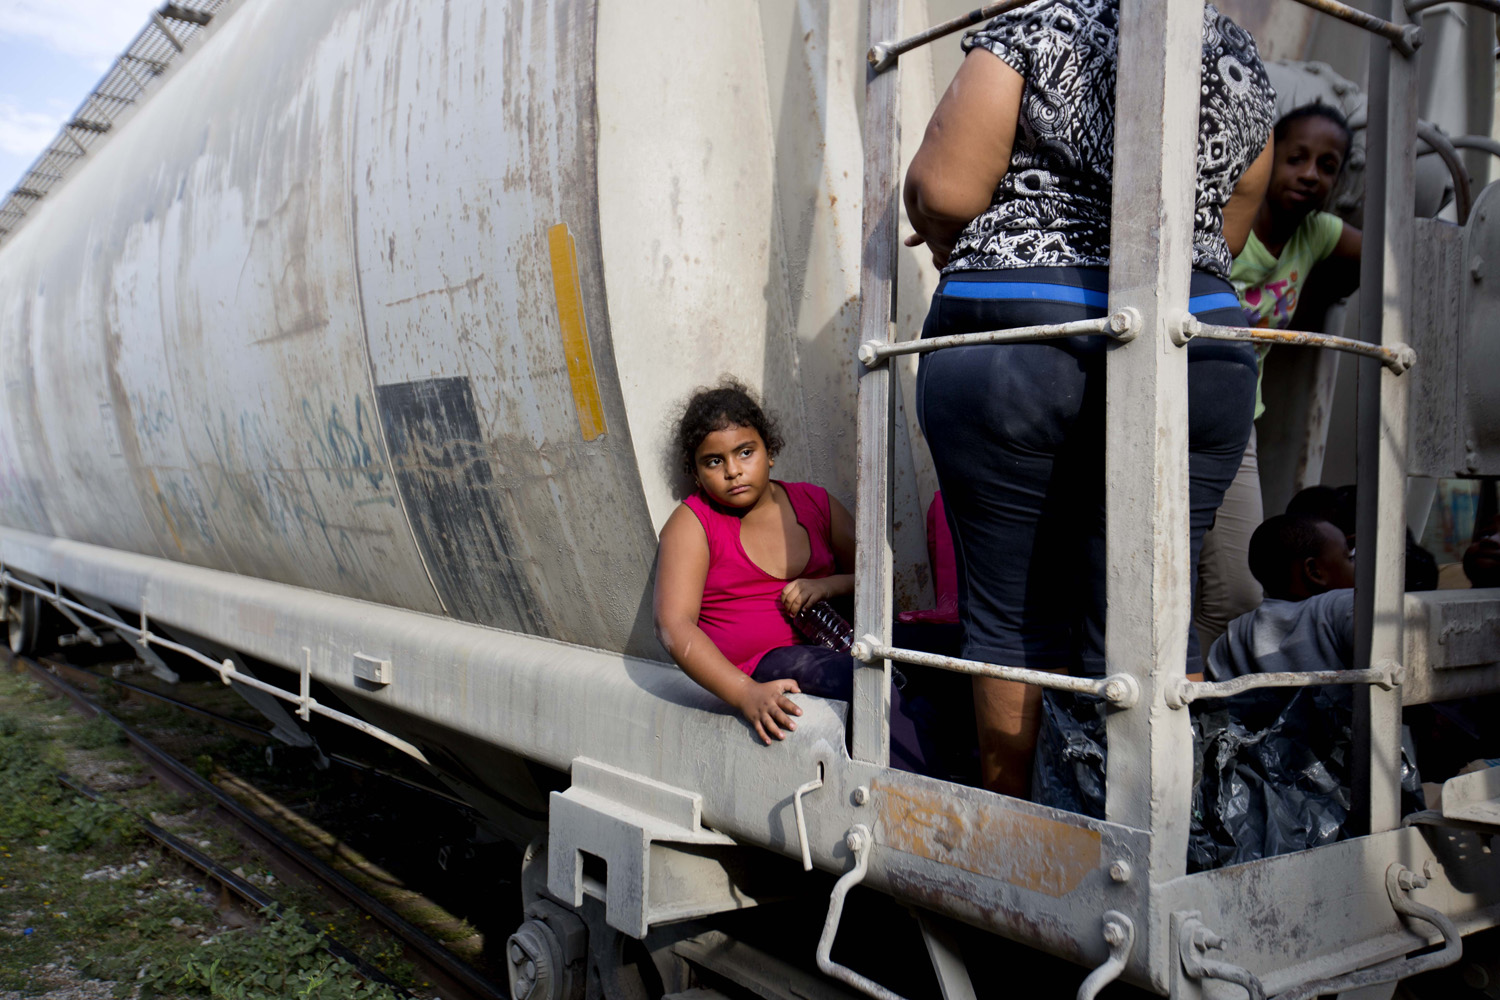 A young girl from Honduras waits for a northbound freight train to depart in Mexico as she makes her way to the U.S. border (Eduardo Verdugo—AP)